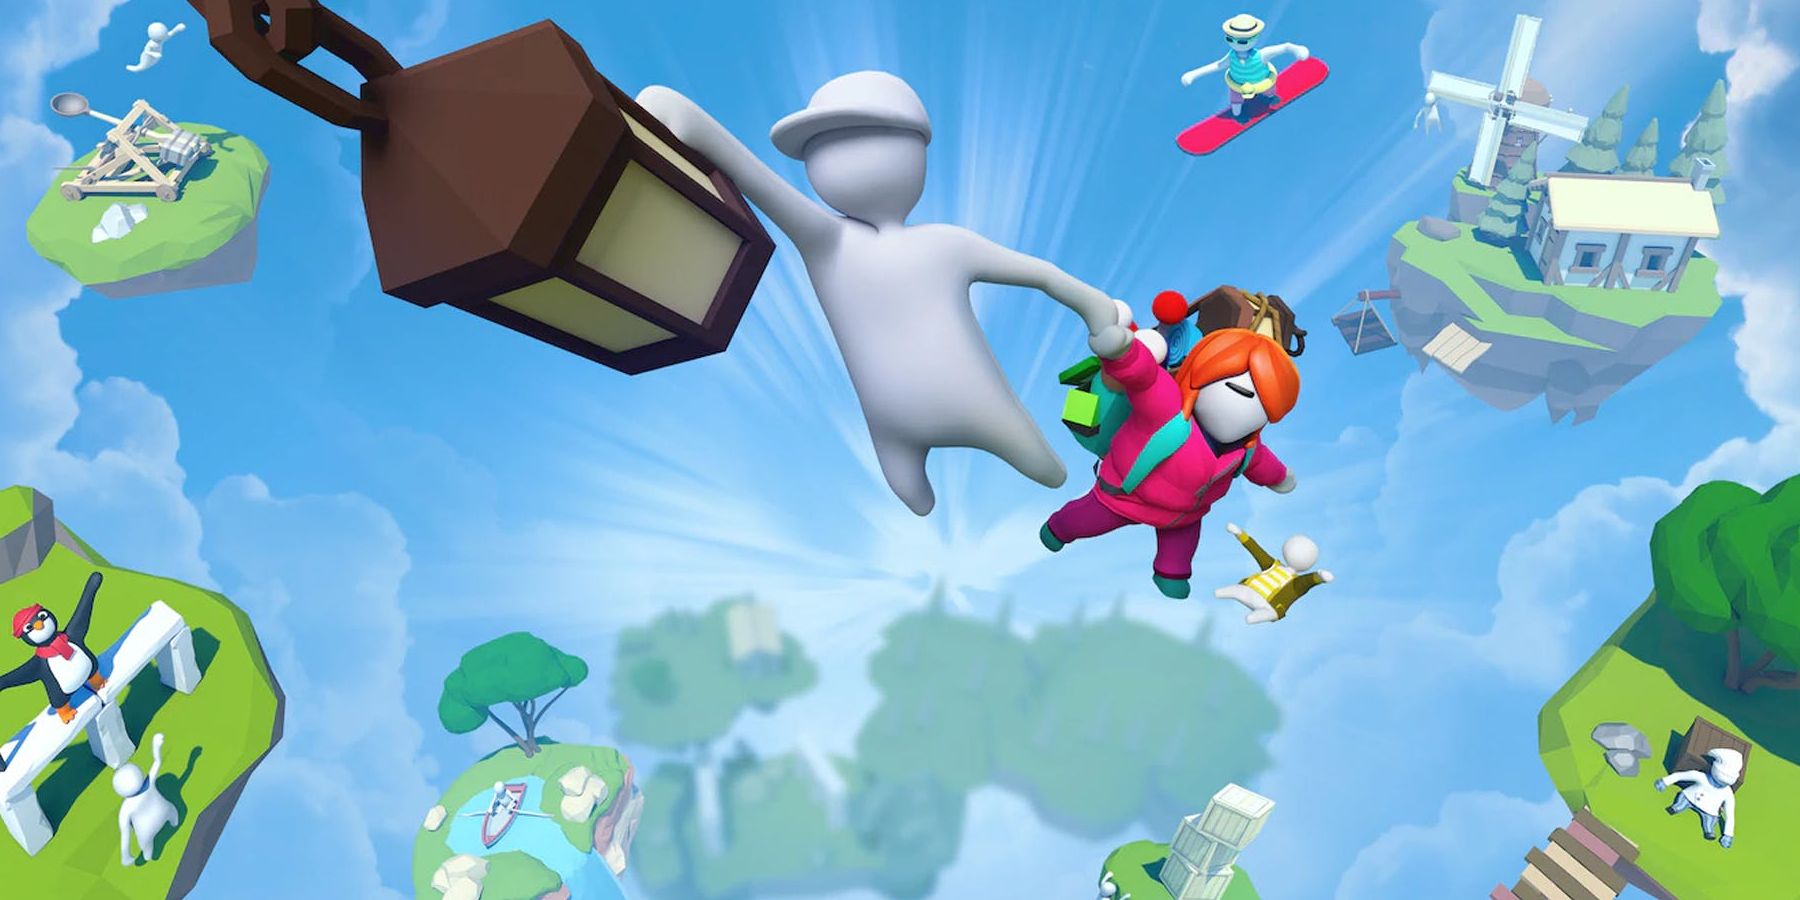 A player hangs onto another player, with another player falling to their doom, while being pulling into the air in Human: Fall Flat.